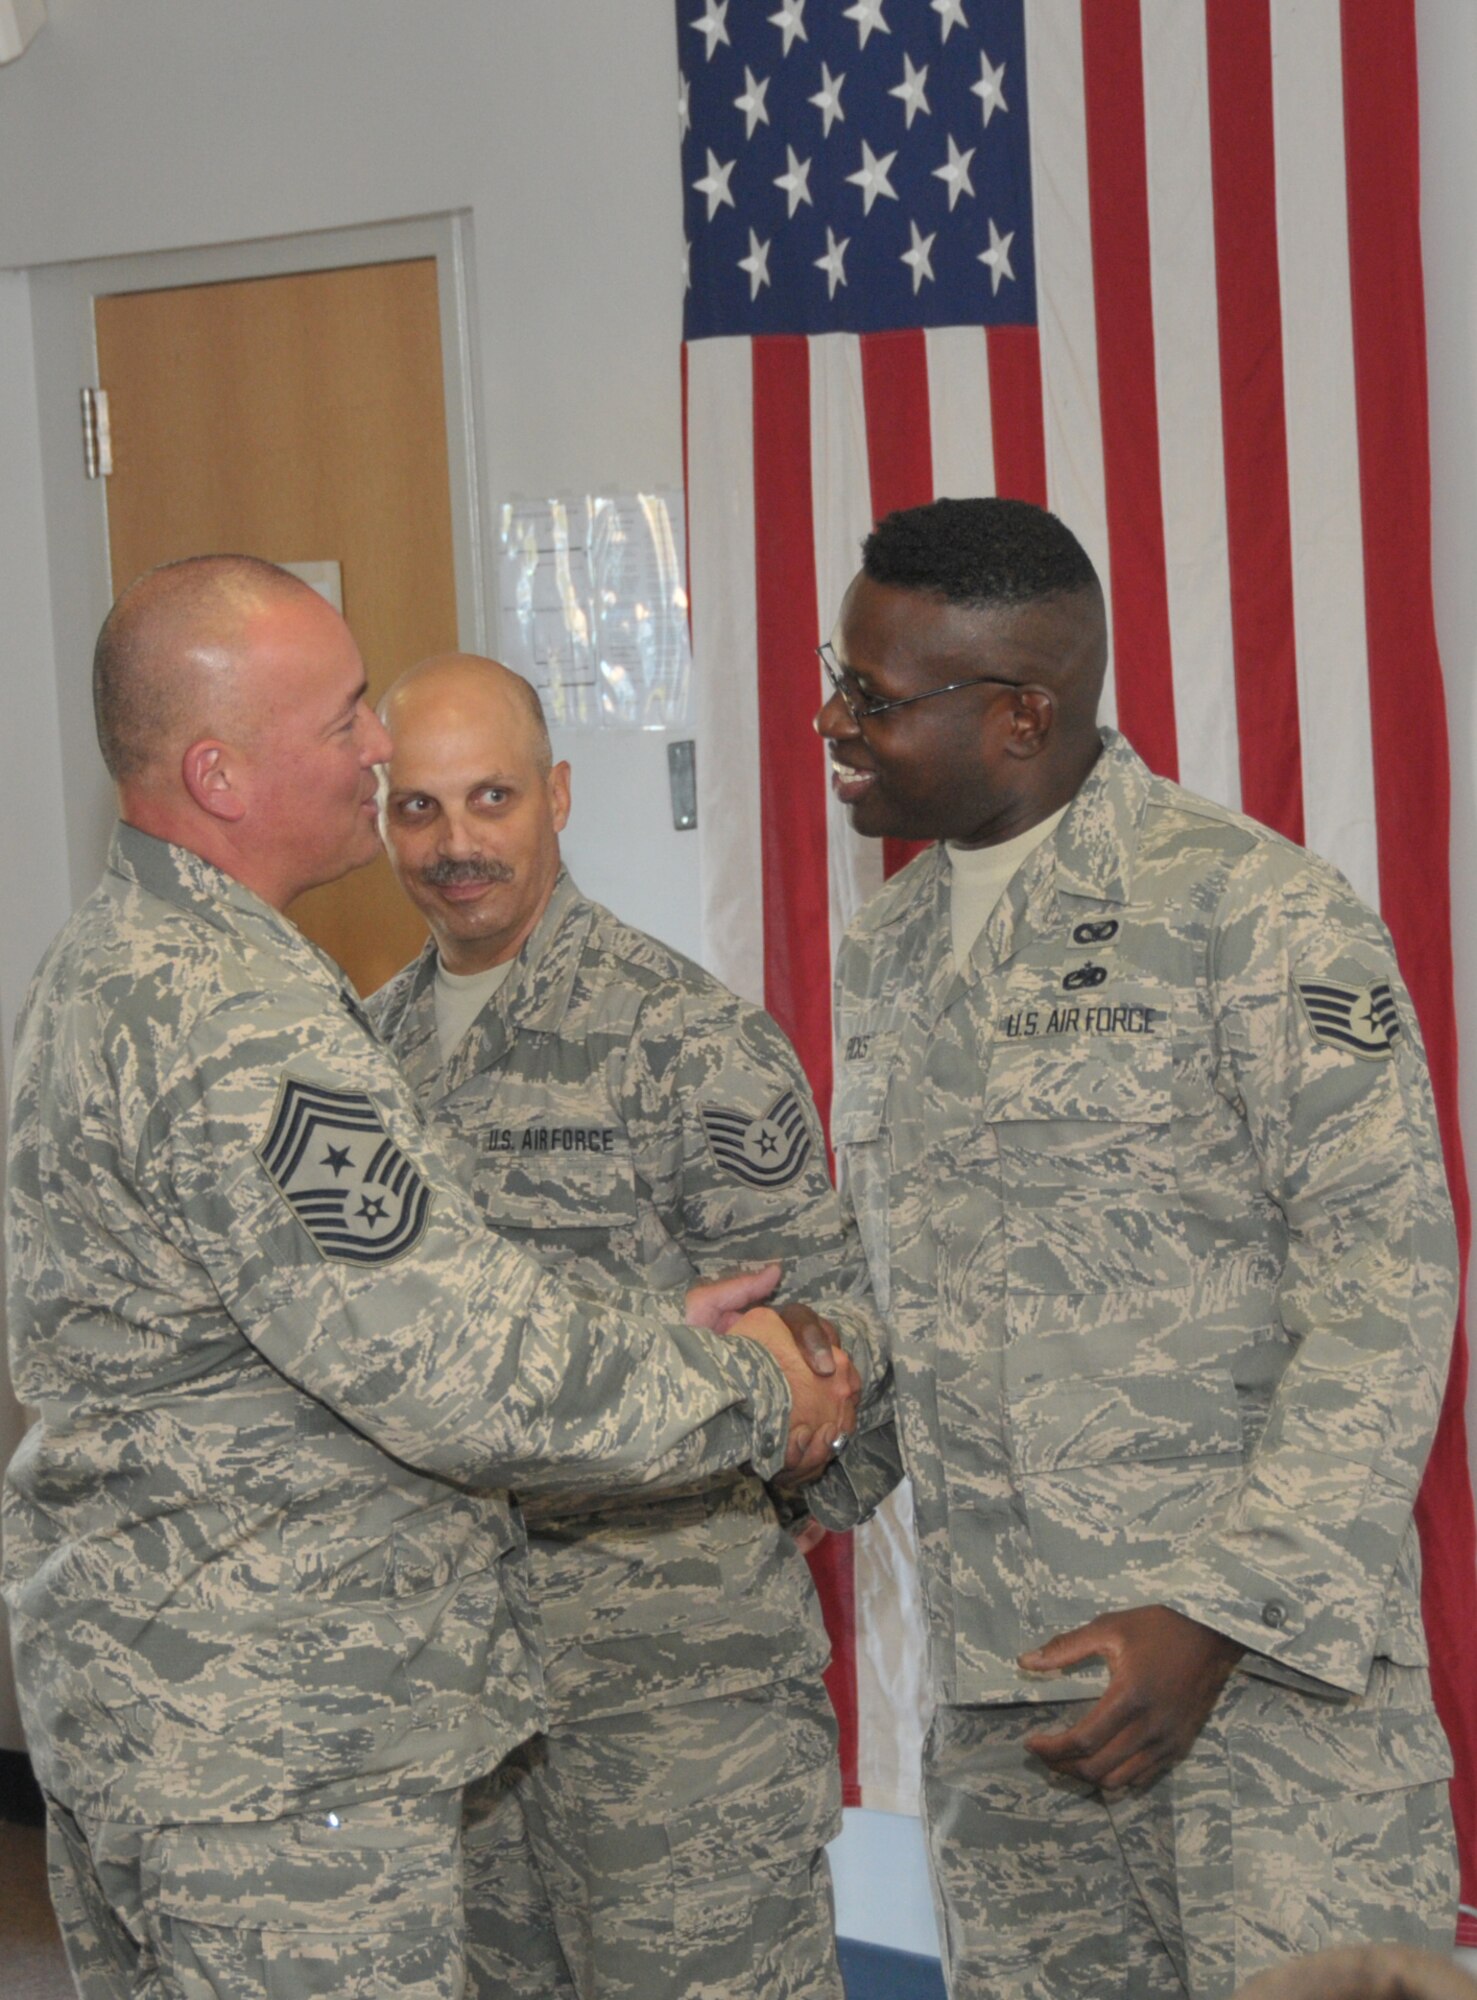 SCOTIA, N.Y. -- Chief Master Sgt. Mitchell Brush, Senior Enlisted Adviser for the National Guard Bureau, presents Tech. Sgt. Keith Eriole (left), 109th Force Support Squadron, and Staff Sgt. David Ricks, 109th Maintenance Group, with a chief's coin in recognition for their assistance to the 109th's chief's council.  (Air National Guard photo by Master Sgt. William M. Gizara/Released)